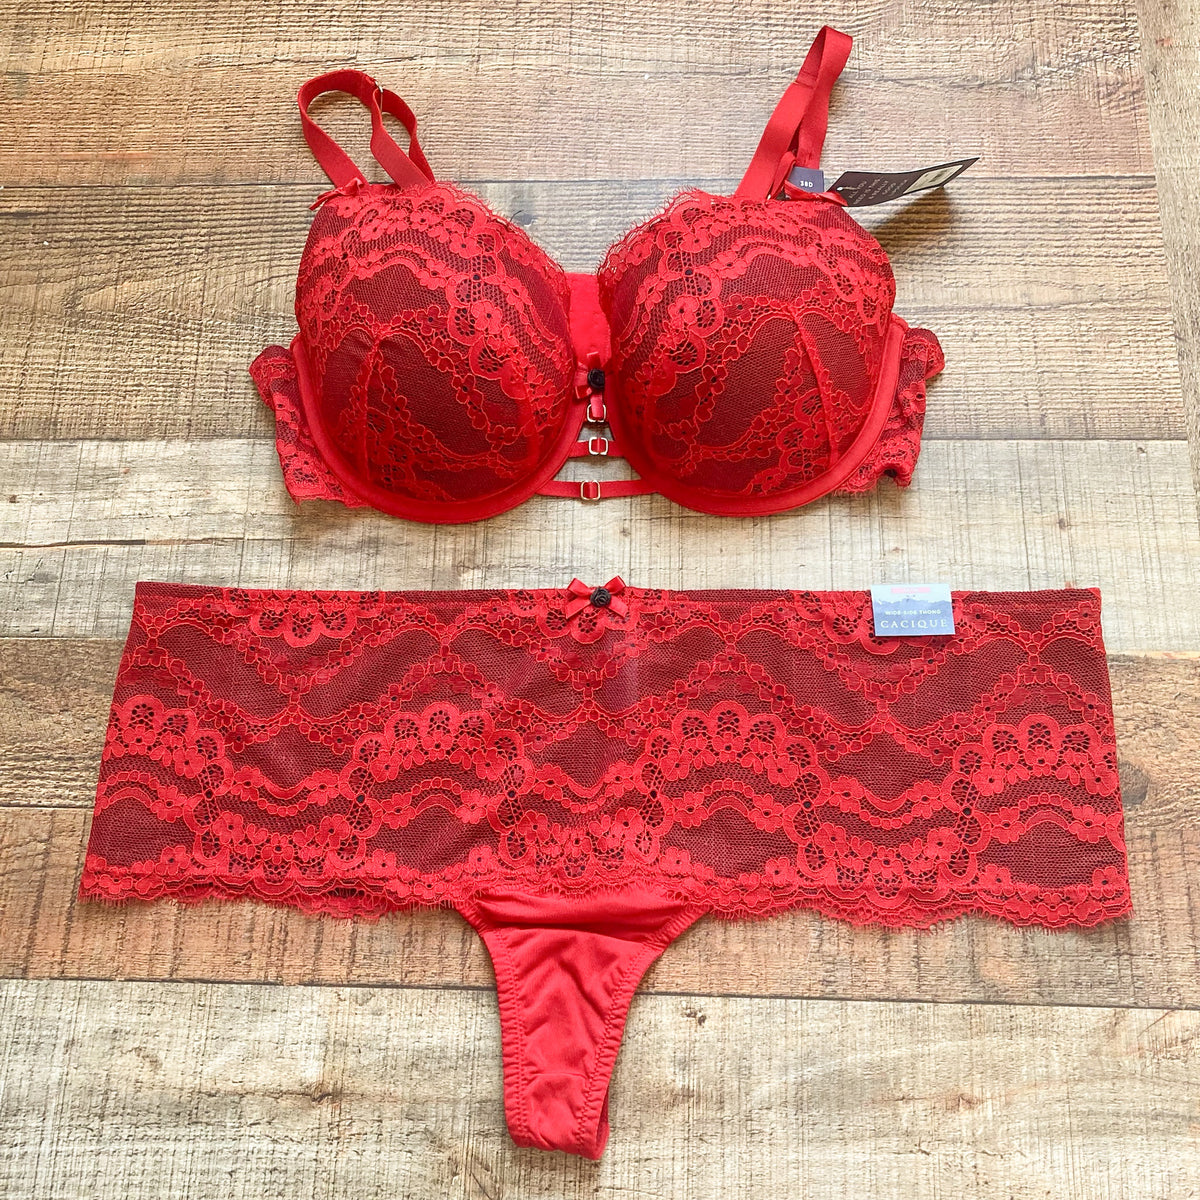 Cacique Red Lace Strappy Balconette Bra NWT- Size 38D (We